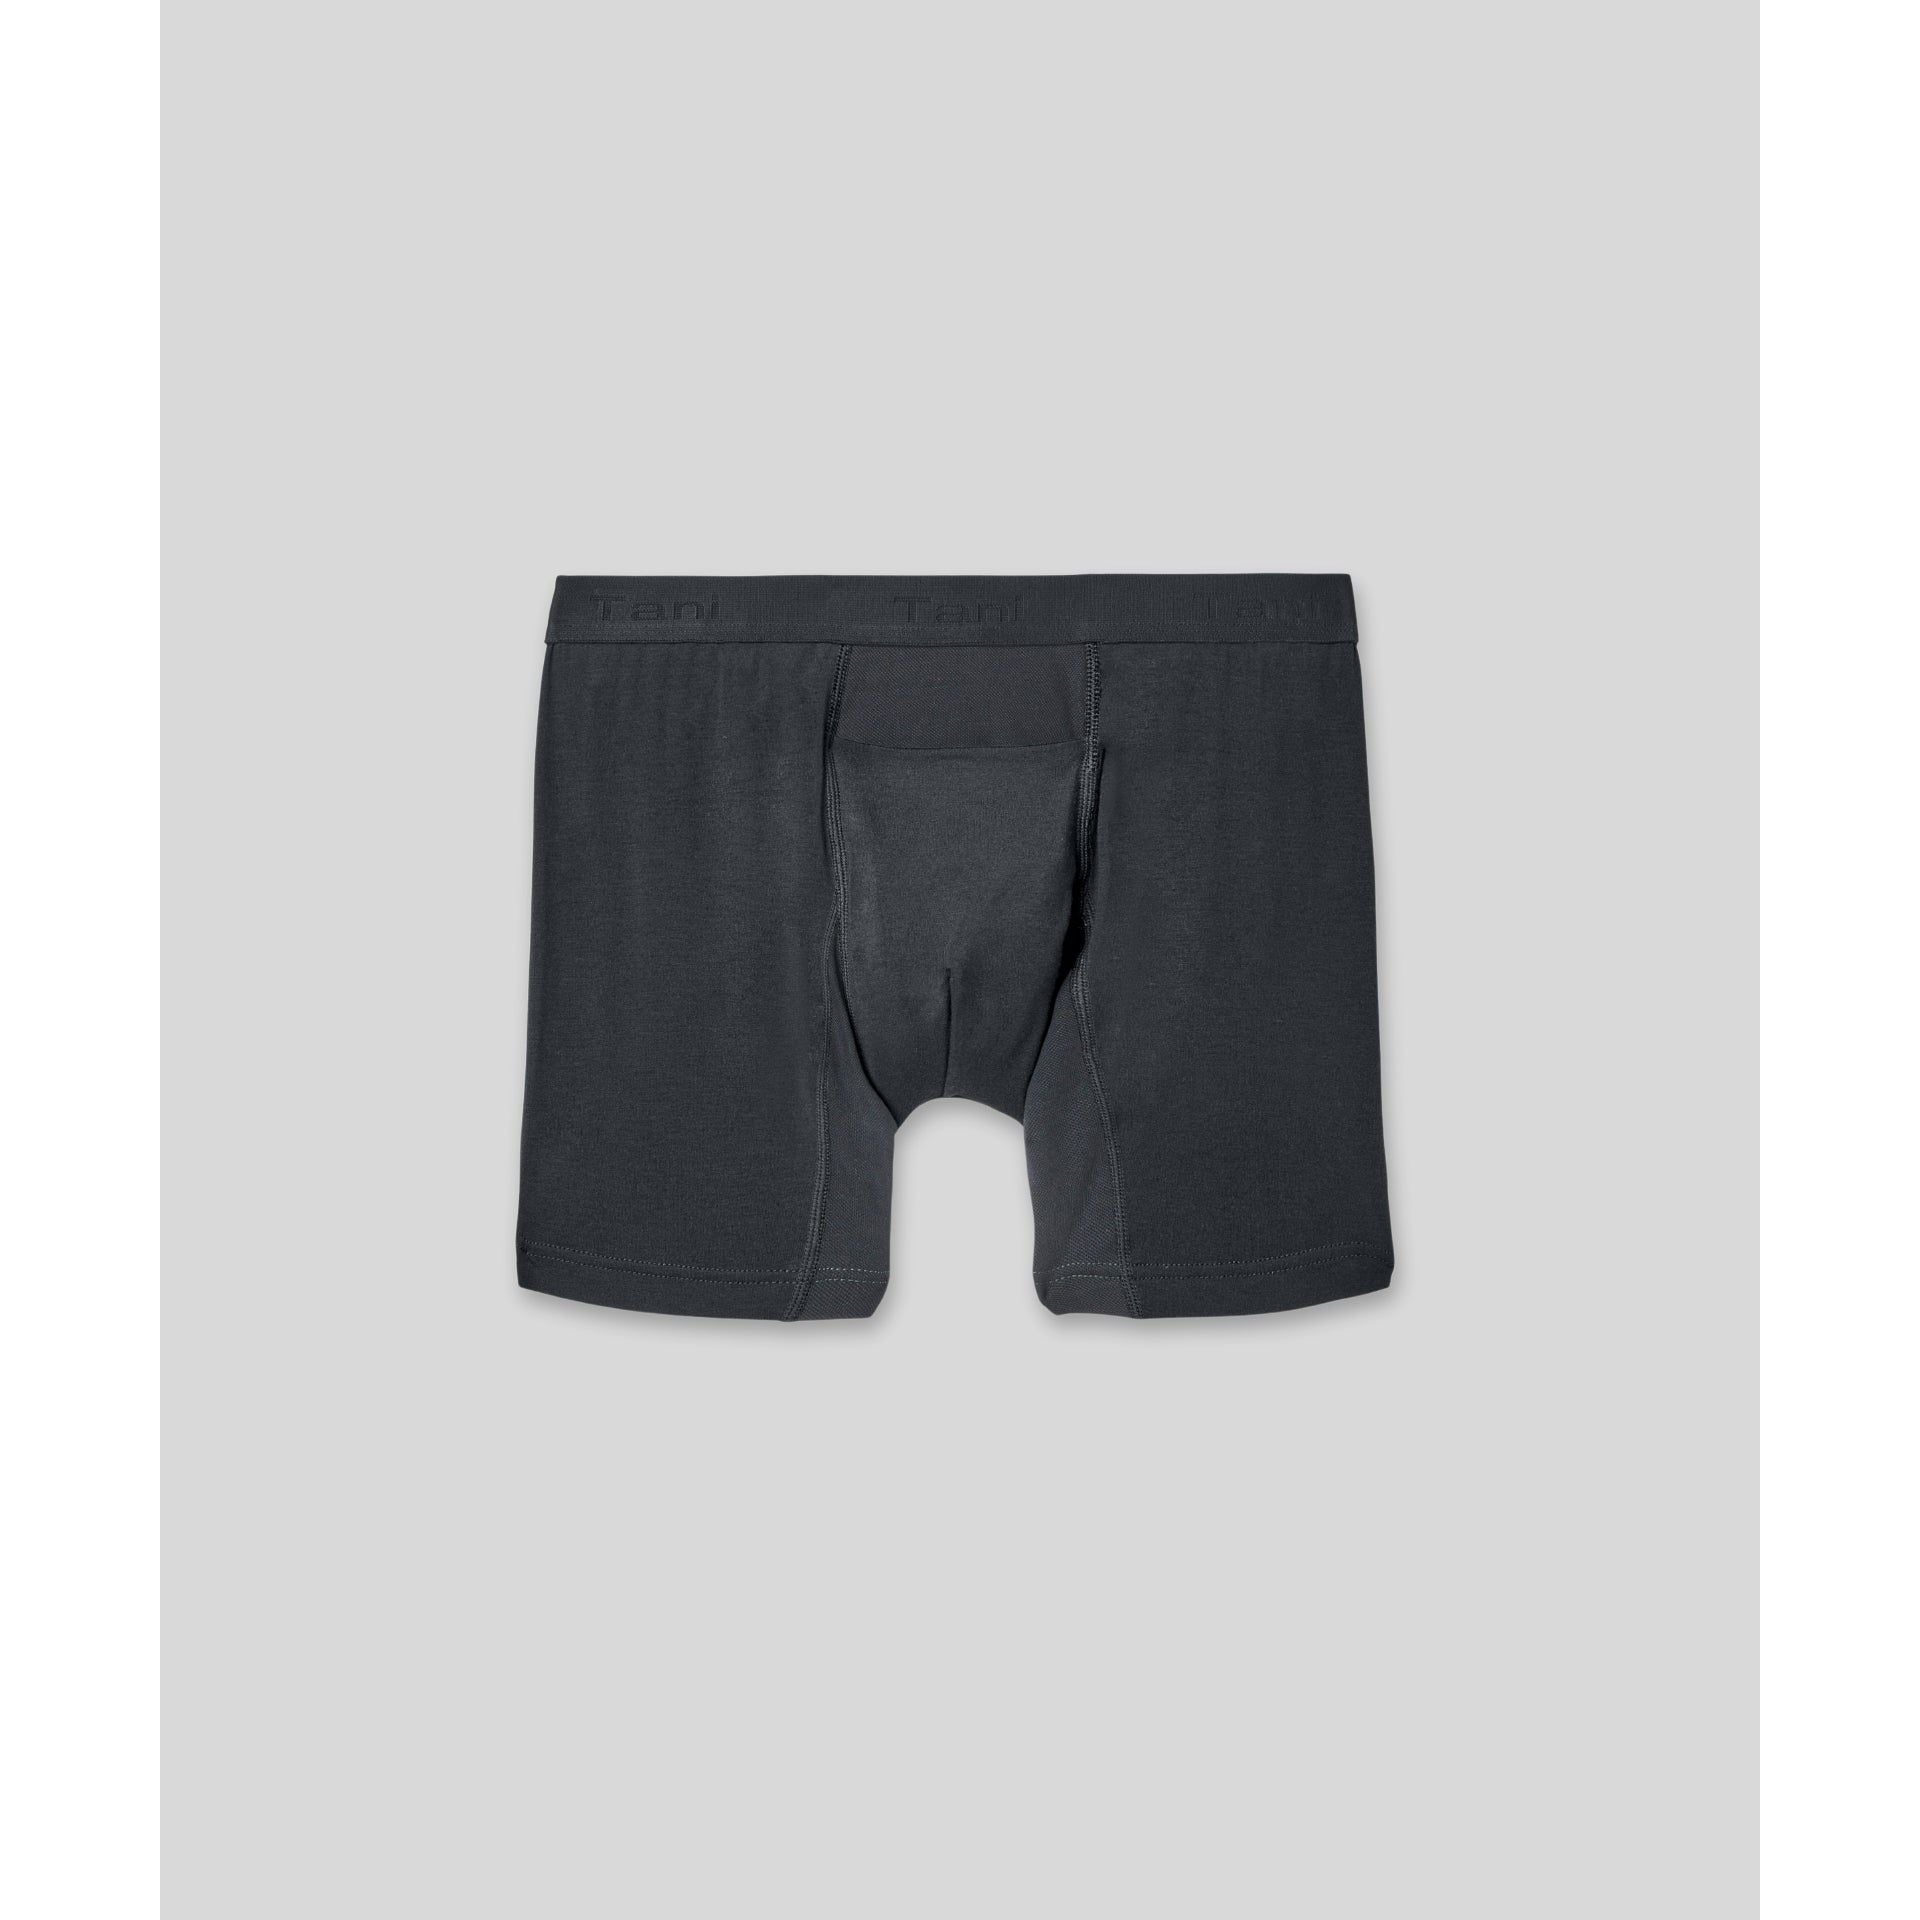 Black Boxer Brief with Horizontal Fly